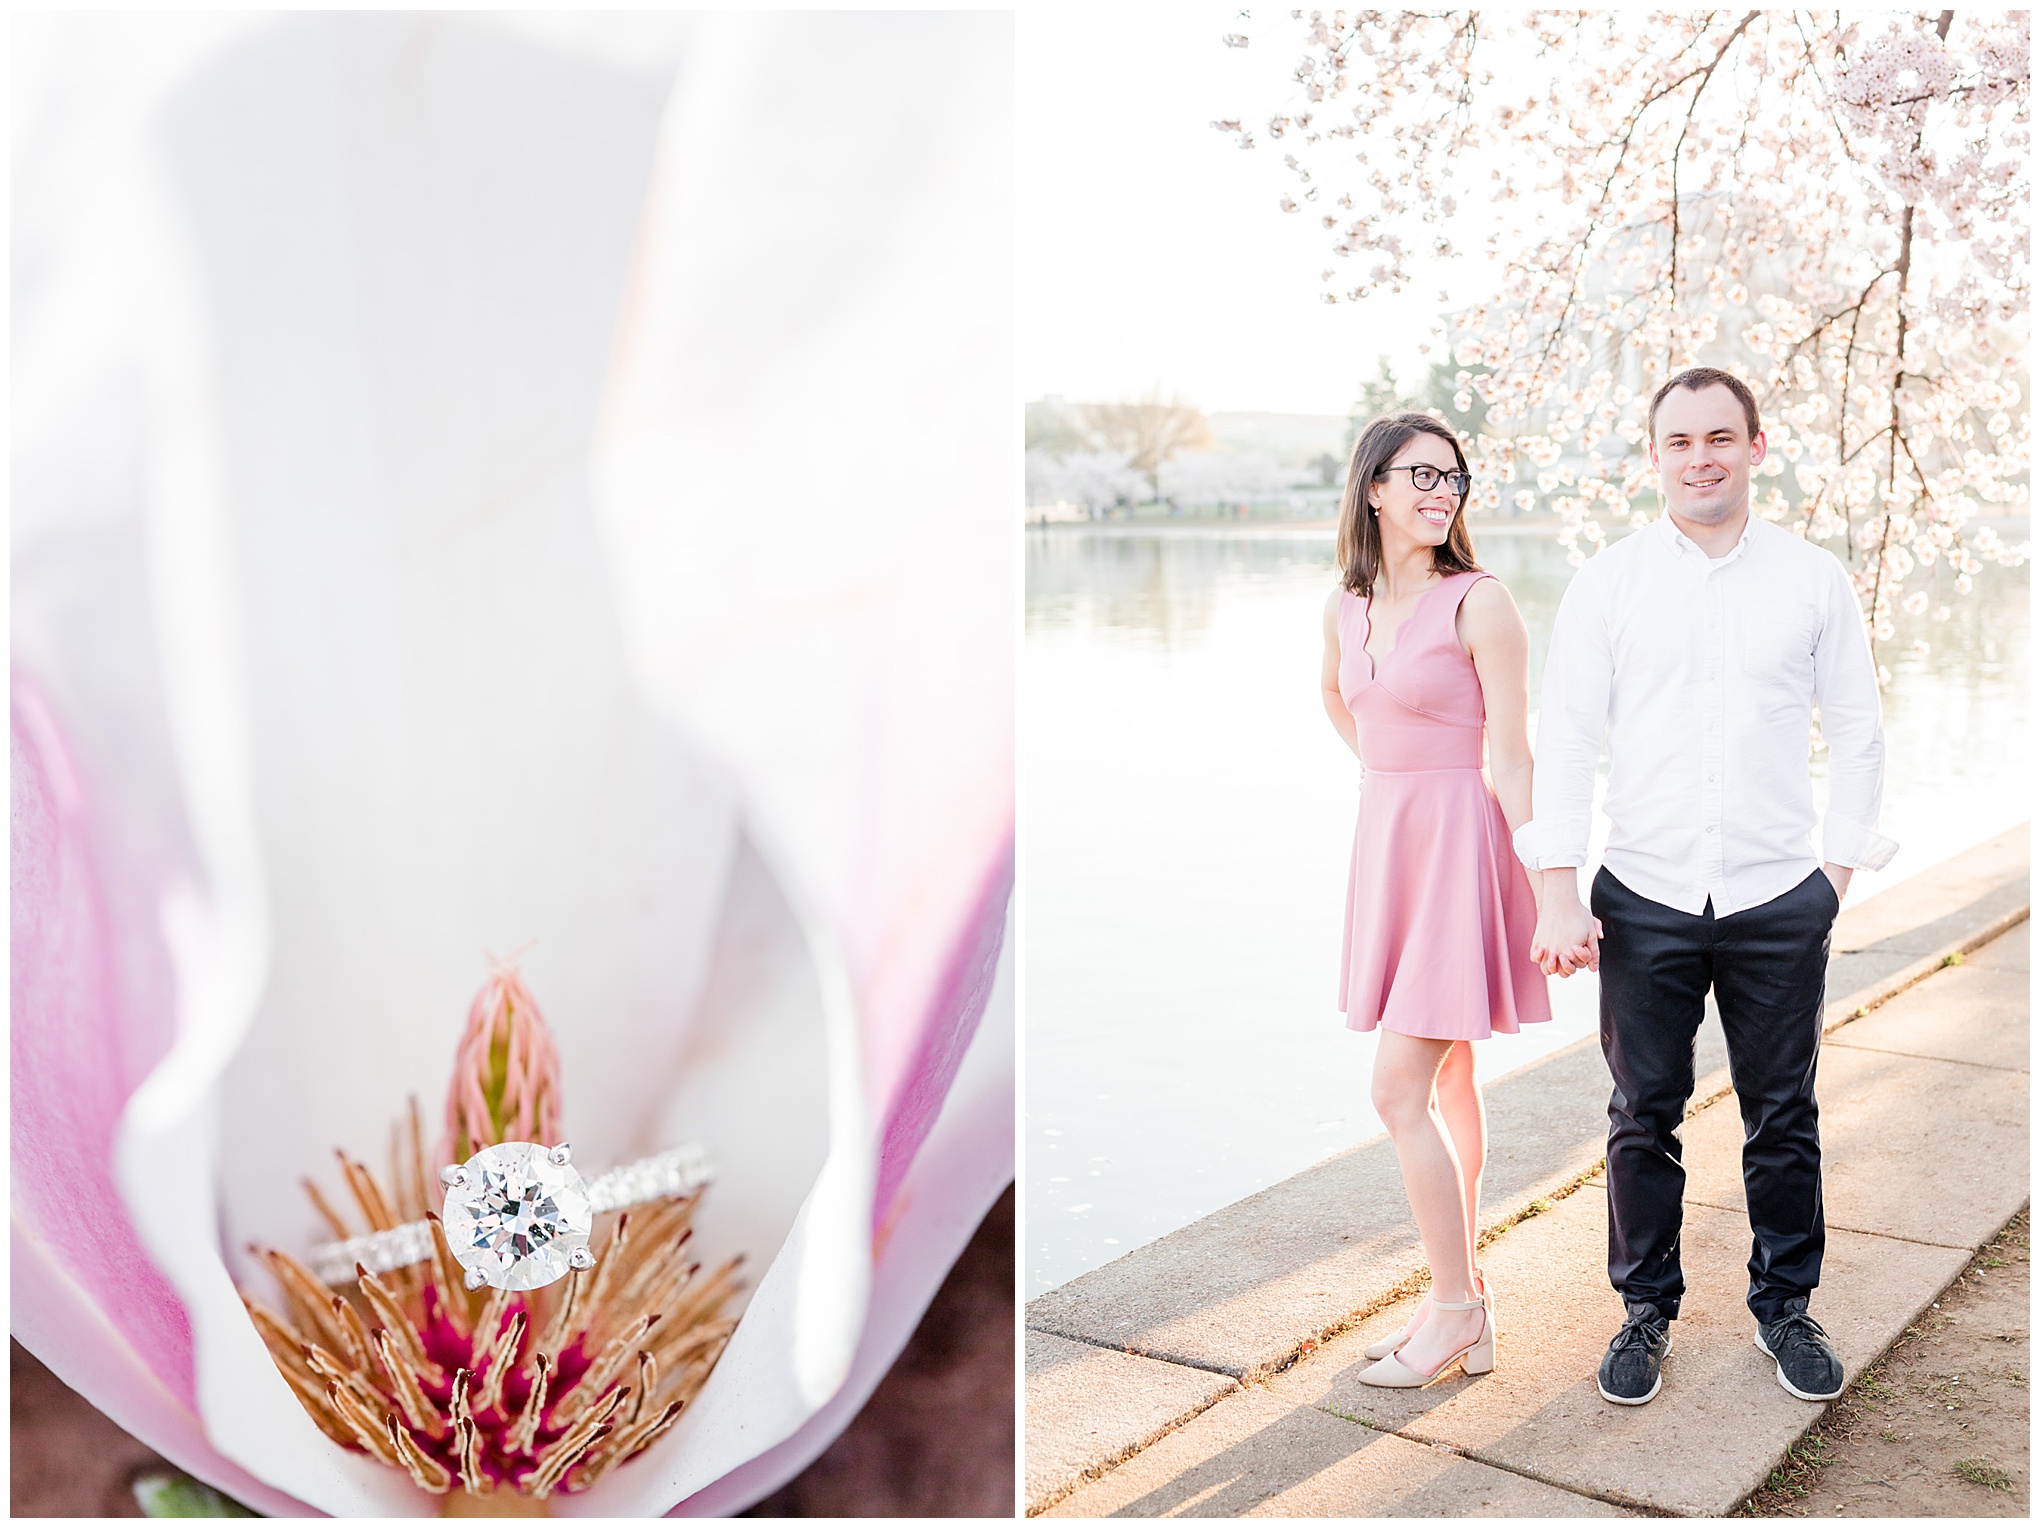 sunny cherry blossoms engagement session, Washington, D.C. engagement photos, Washington D.C. engagement photos, sunrrise engagement photos, cherry blossom engagement photos, D.C. cherry bloossoms, D.C. cherry blossoms photos, cherry blossom photos, cherry blossoms portrraits, sunny engagement photos, classic engagement photos, Rachel E.H. Photography, engagement session style, magnolia blossom, brilliant cut engagement ring